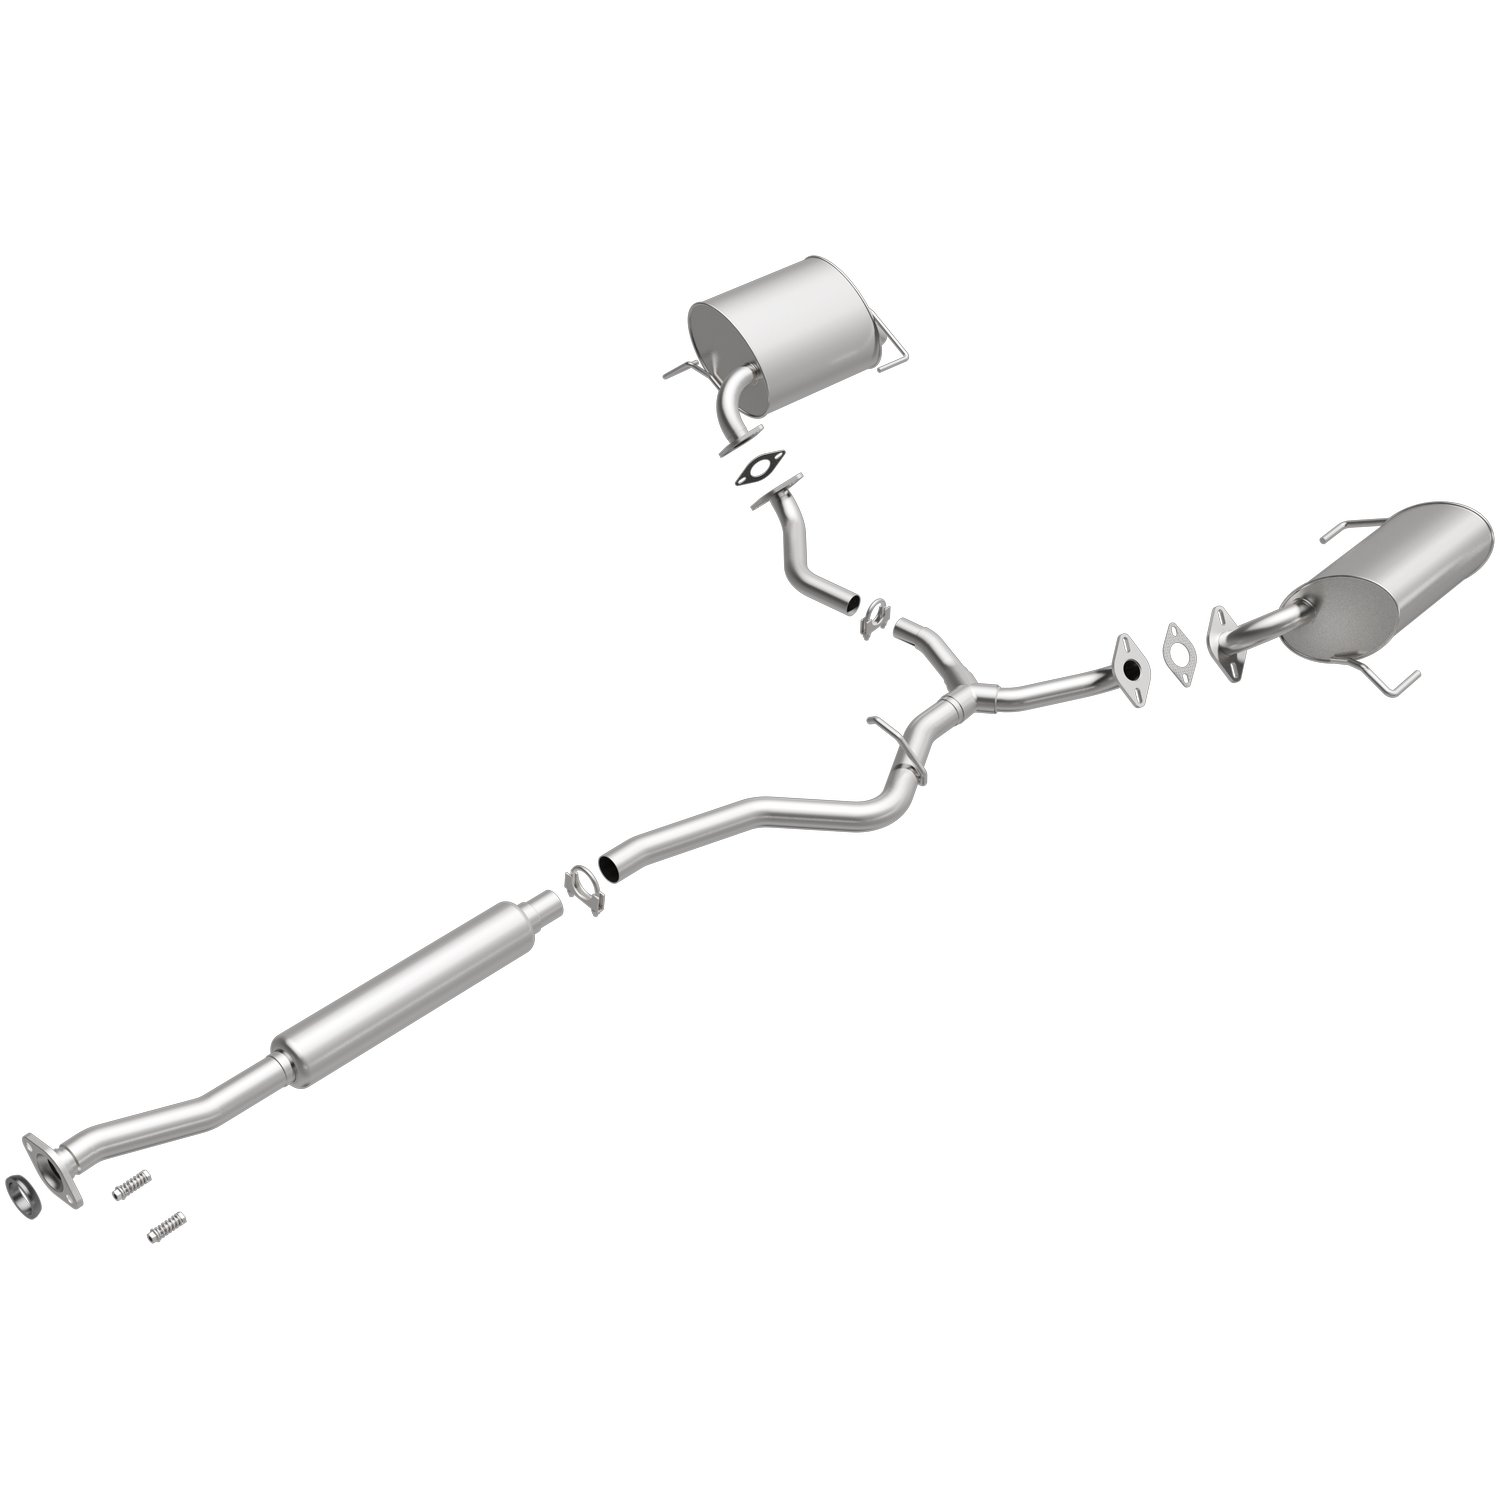 Direct-Fit Exhaust Kit, 2005 Subaru Outback 2.5L